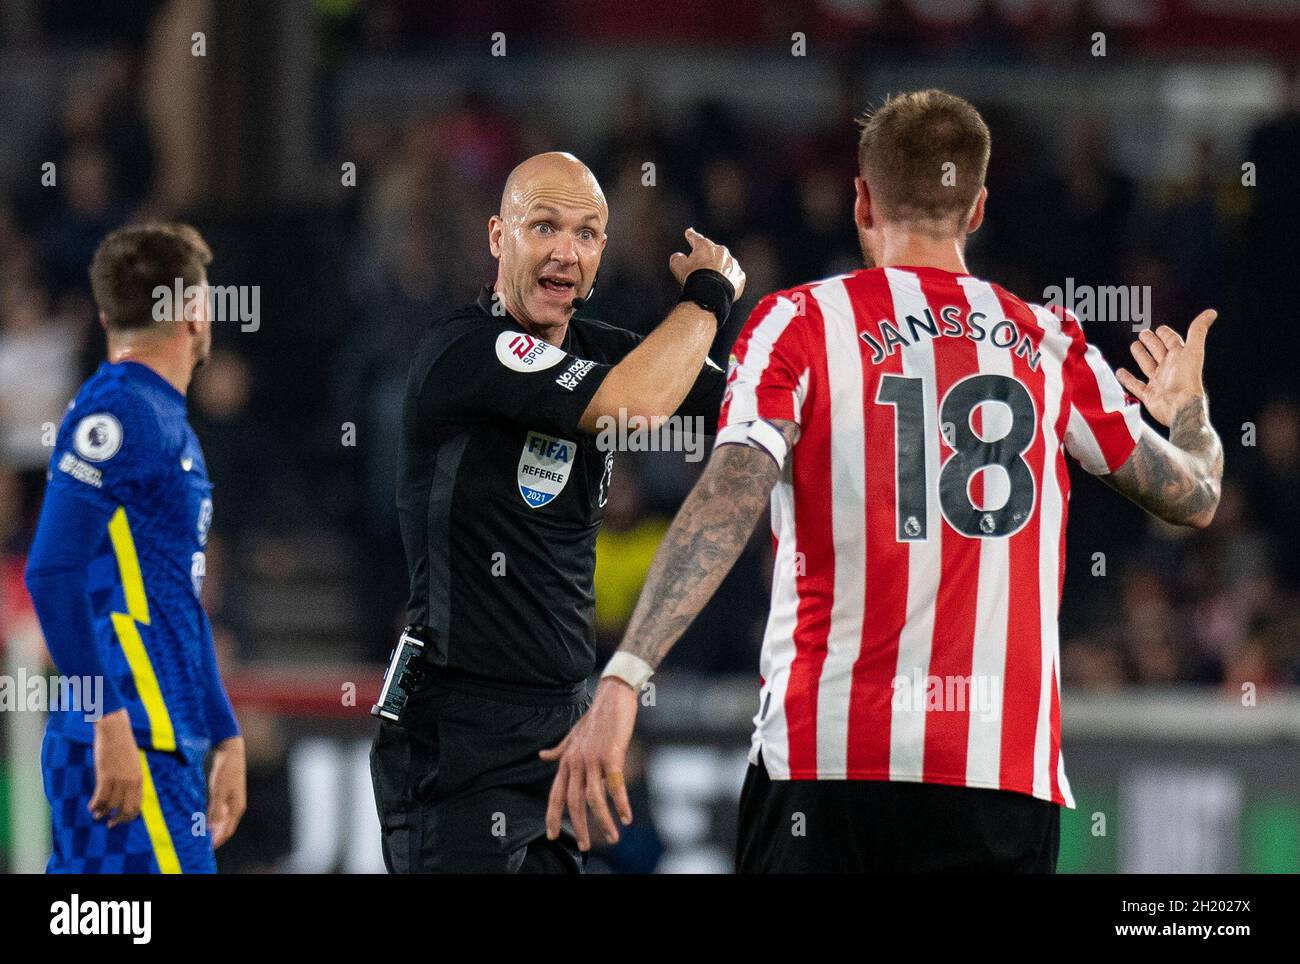 Referee Anthony Taylor and Brentford Pontus Jansson during the Premier League match between Brentford and Chelsea at the Brentford Community Stadium, Brentford, England on 16 October 2021. Photo by Andrew Aleksiejczuk / PRiME Media Images. Stock Photo